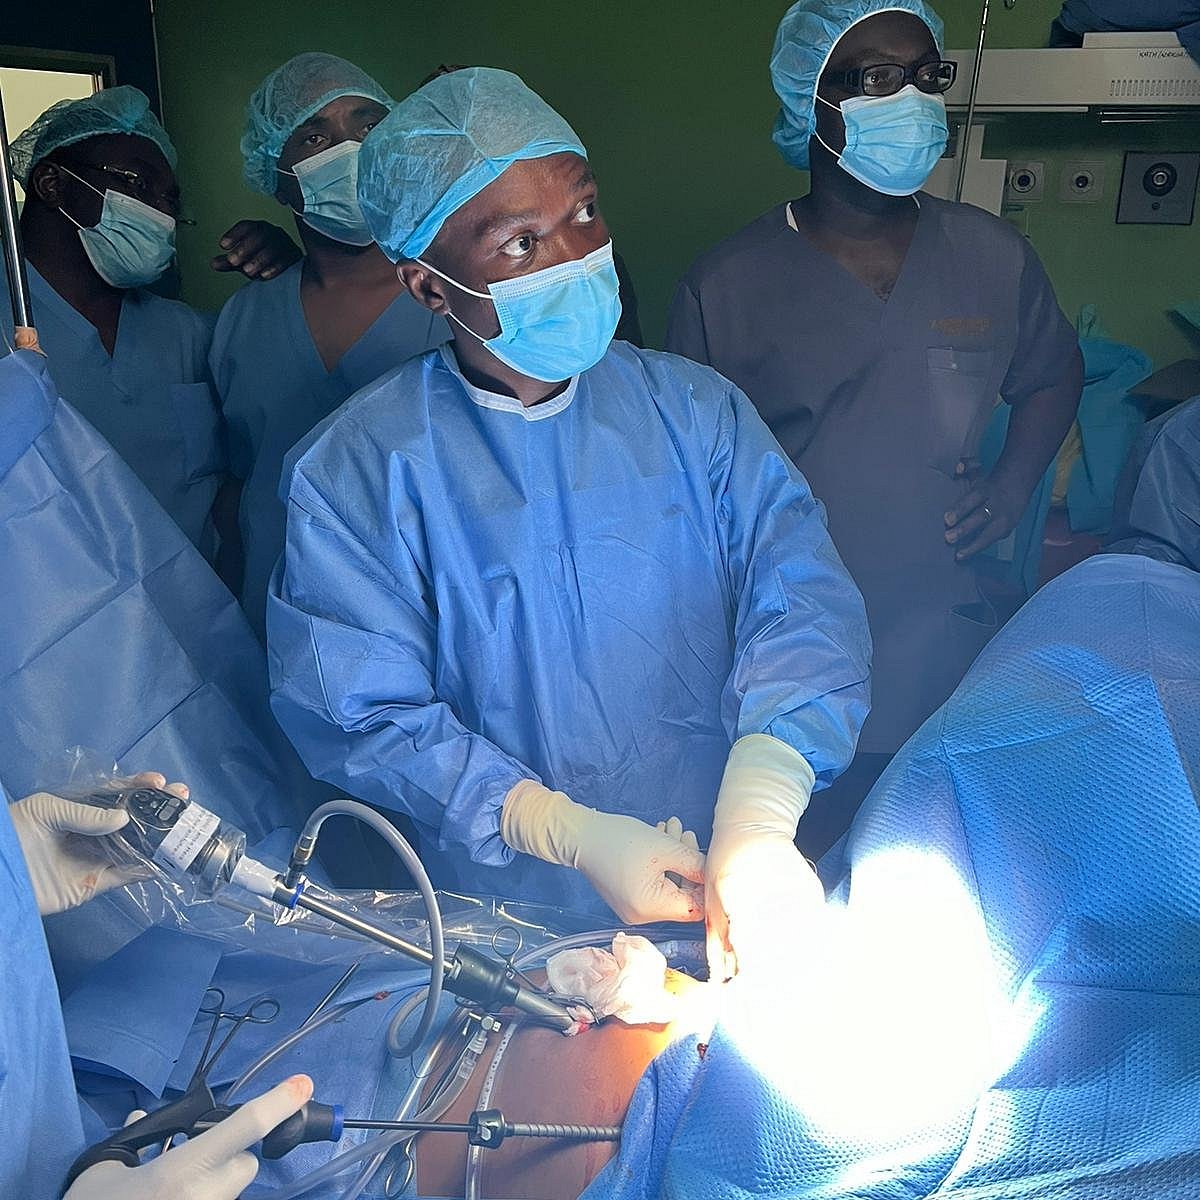 Surgical team operating with instruments on the covered abdomen